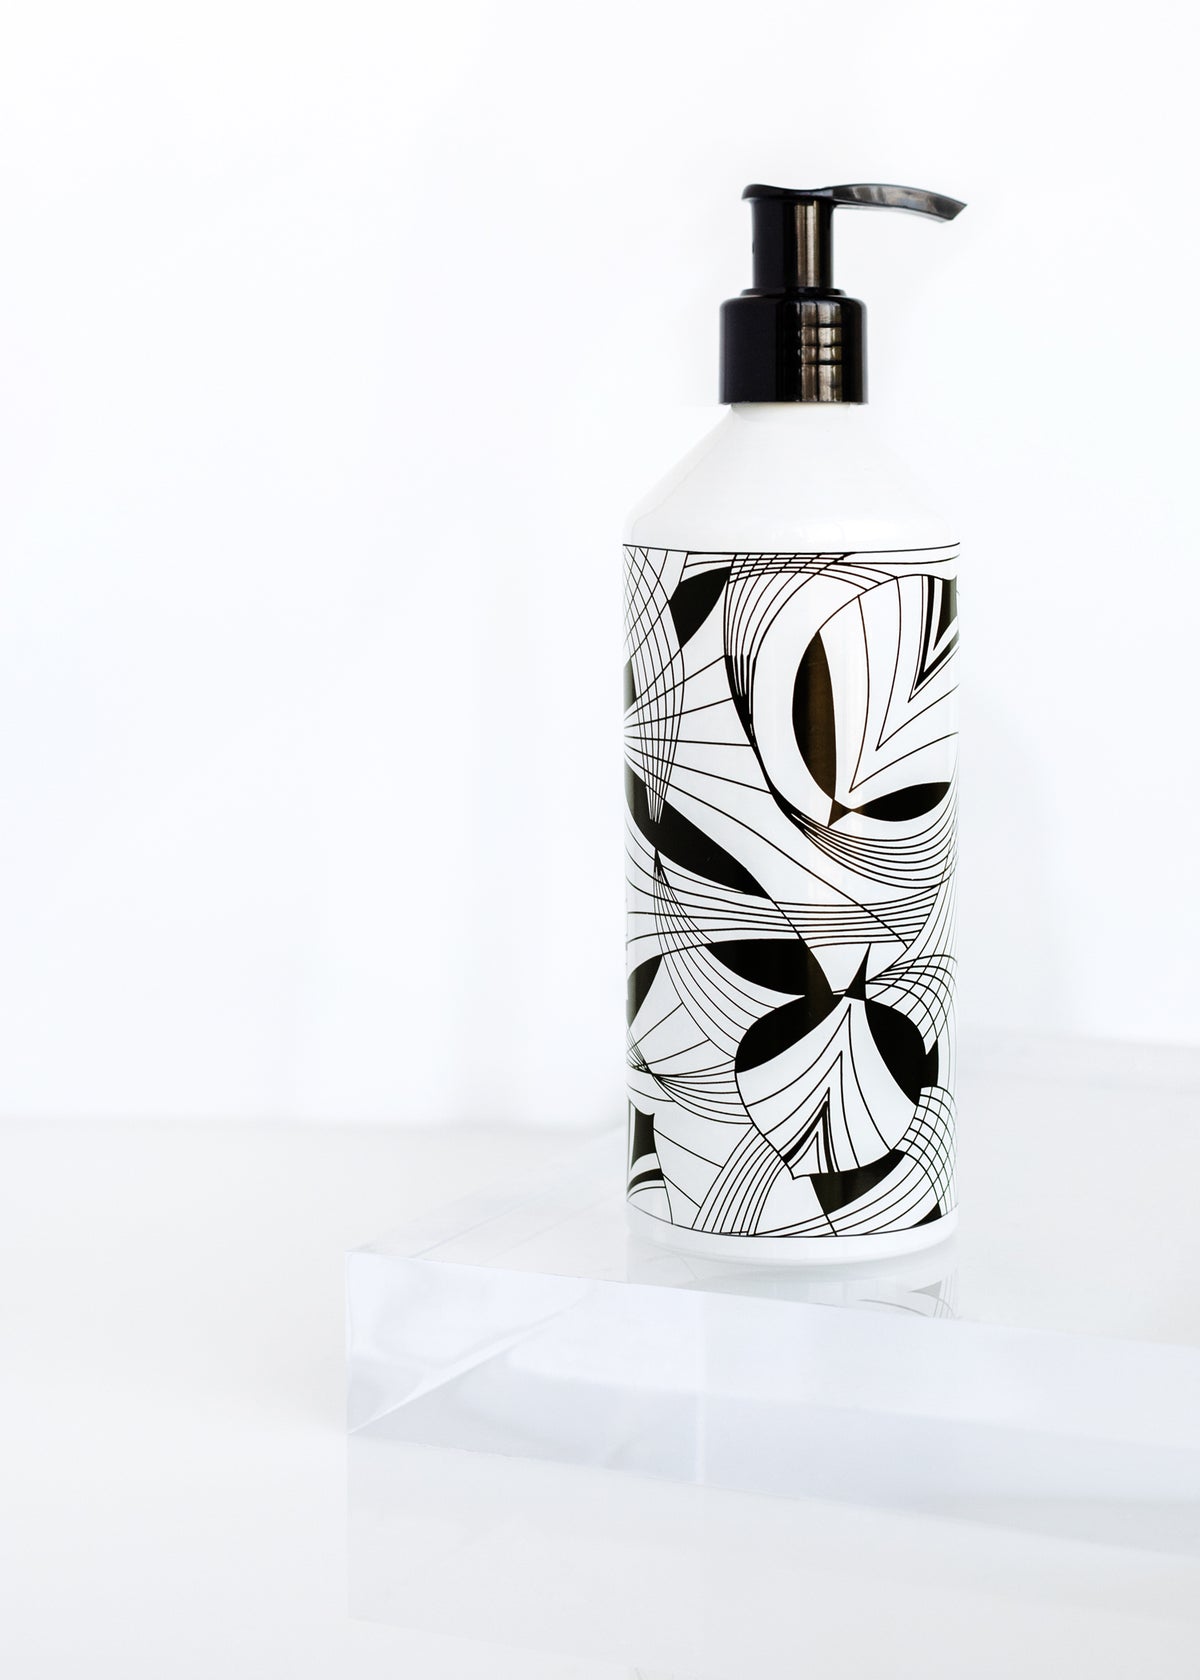 A Margot Elena lotion dispenser with a modern black and white geometric design, featuring vegan skincare ingredients, placed on a clear surface against a white background.